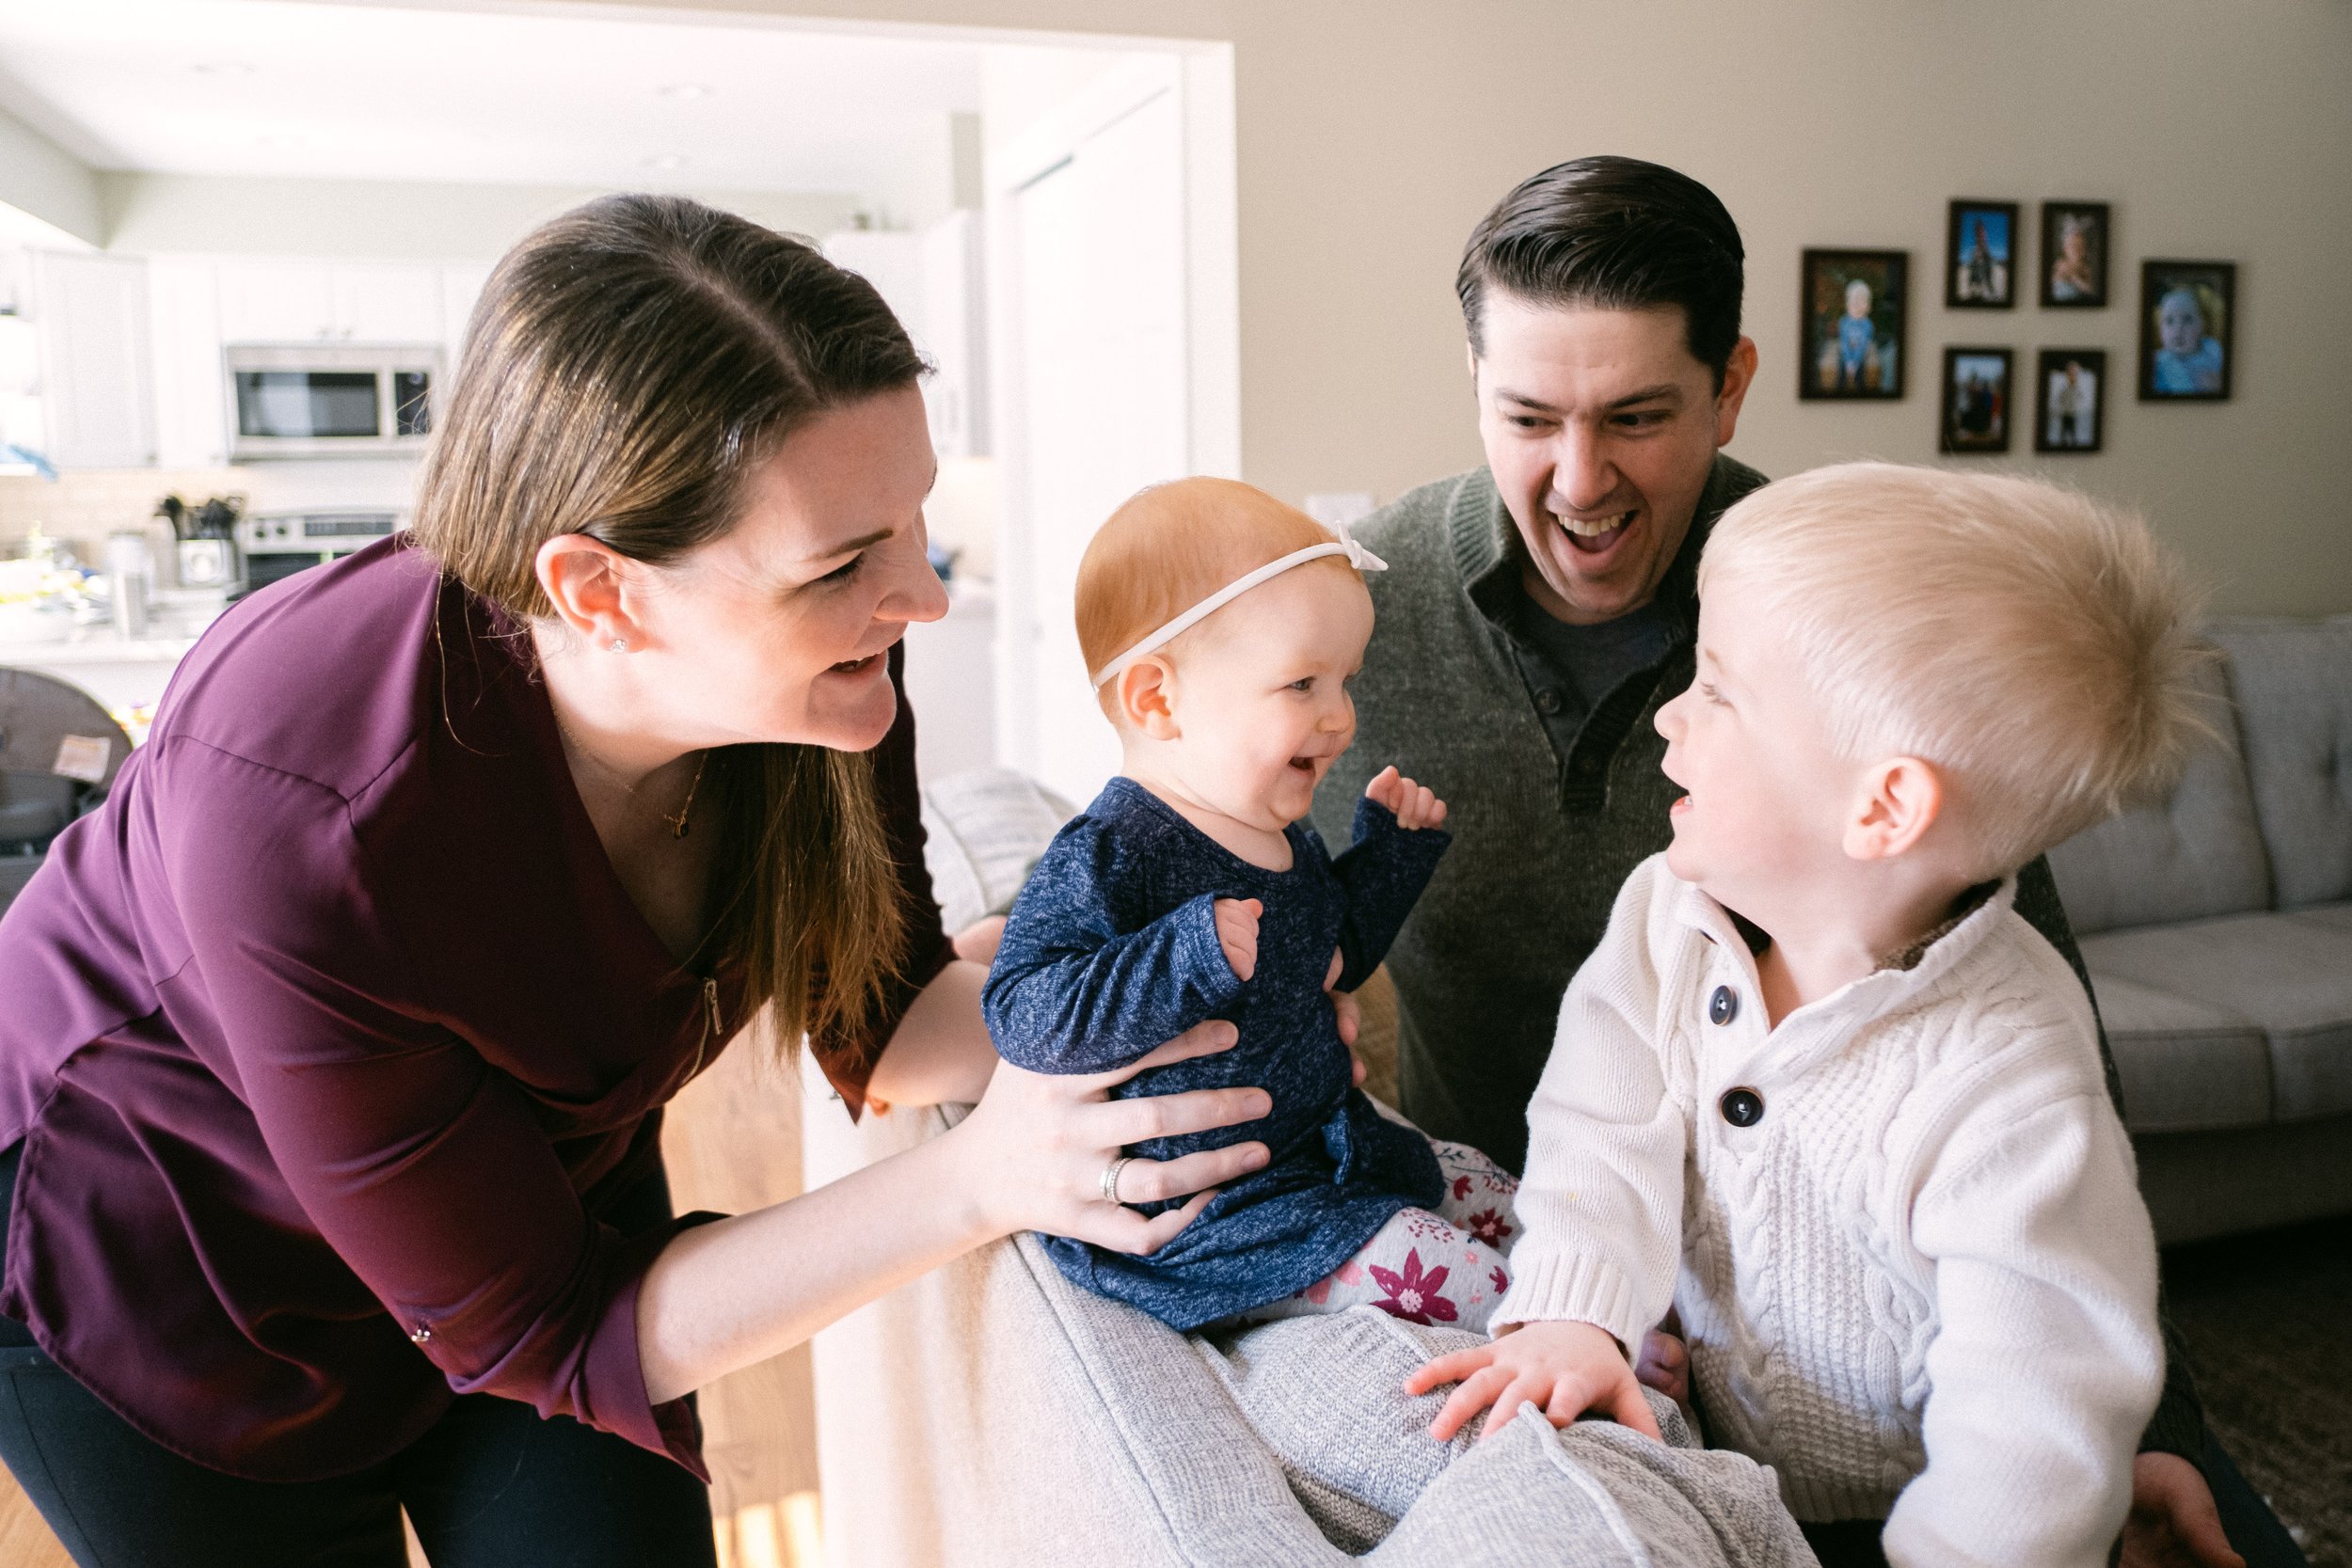  “He was WONDERFUL! We had a skeptical 2 year old, and a 9 month old and from the minute he walked in he built rapport with my kids and got them comfortable. The photos are natural and captured our family perfectly. I'll be booking him again soon! :)